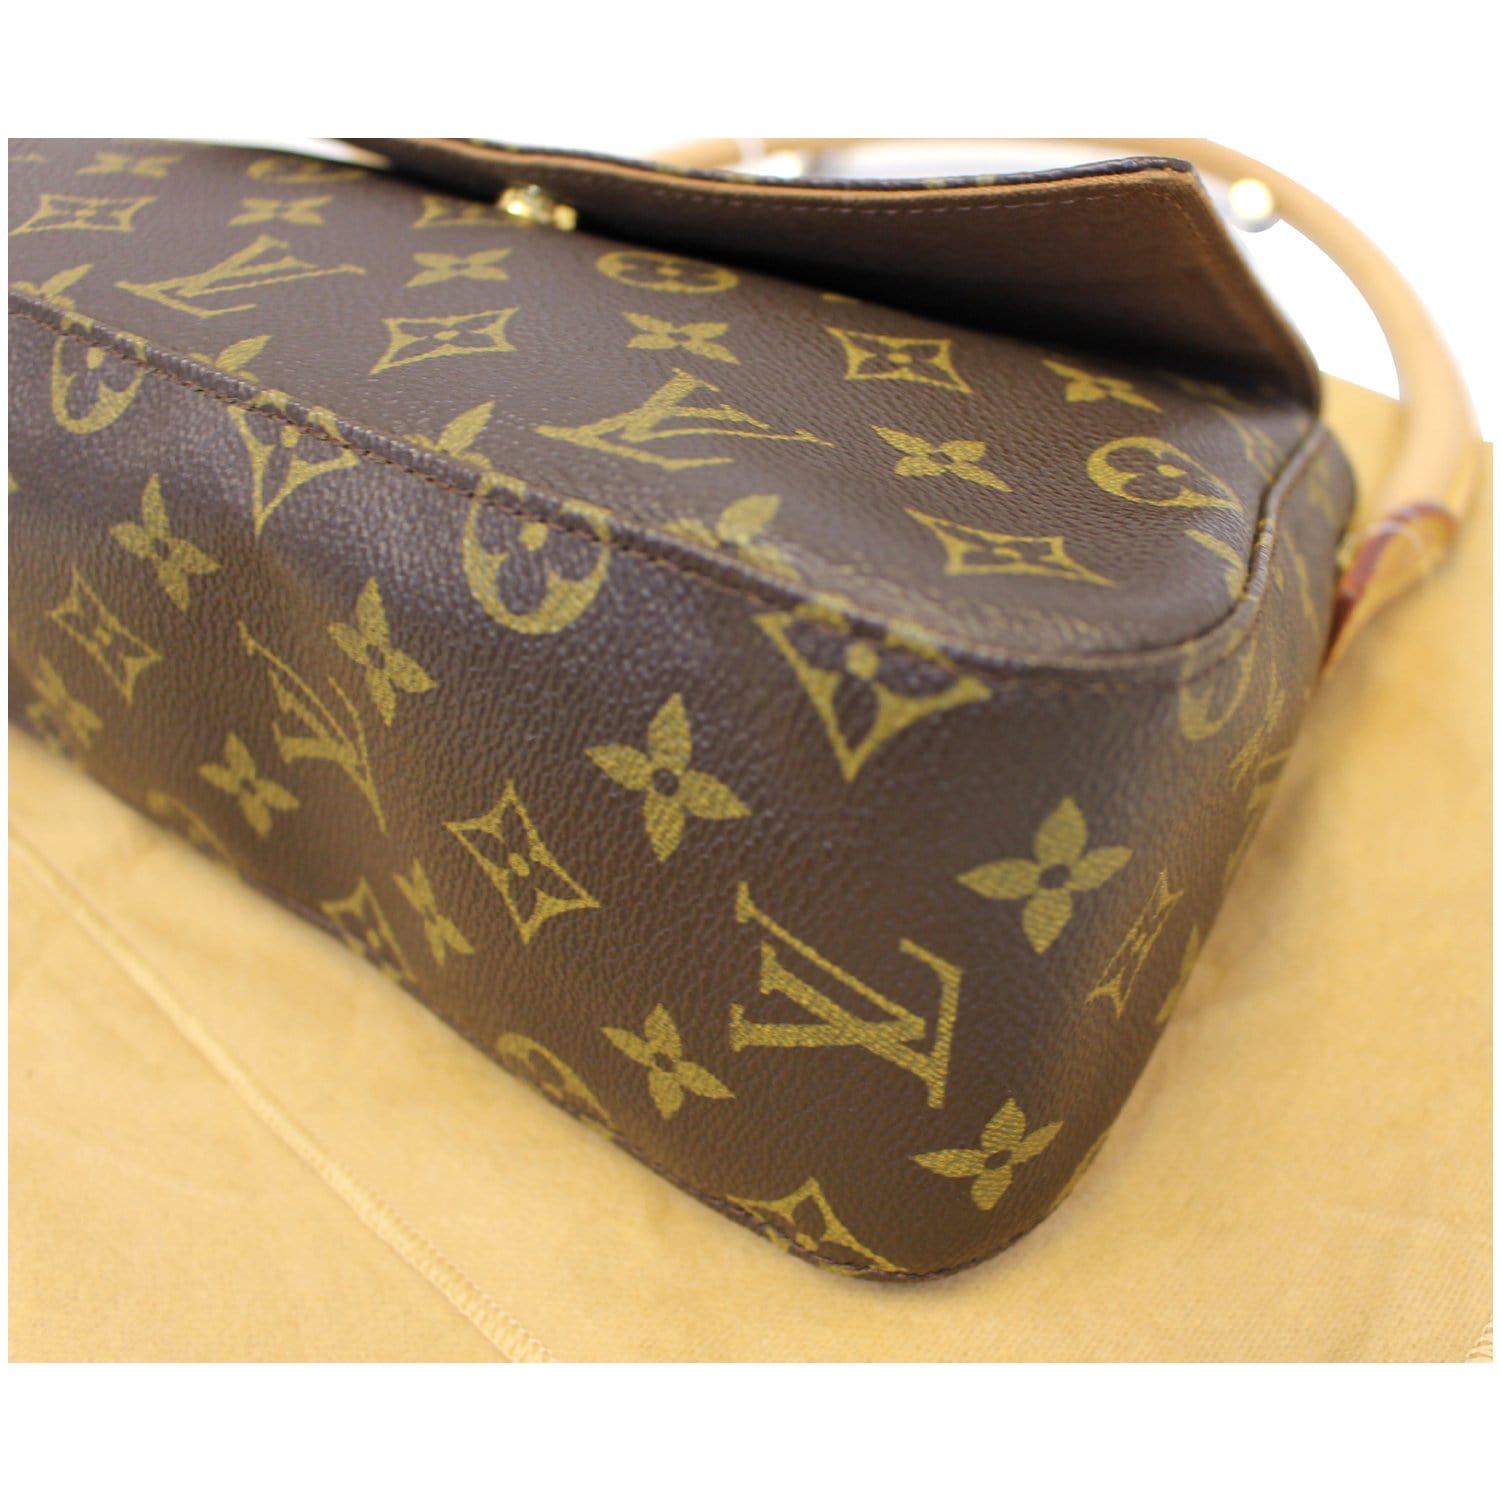 Sold at Auction: Louis Vuitton Monogram Canvas Looping PM Handbag Date  Code: SD0081